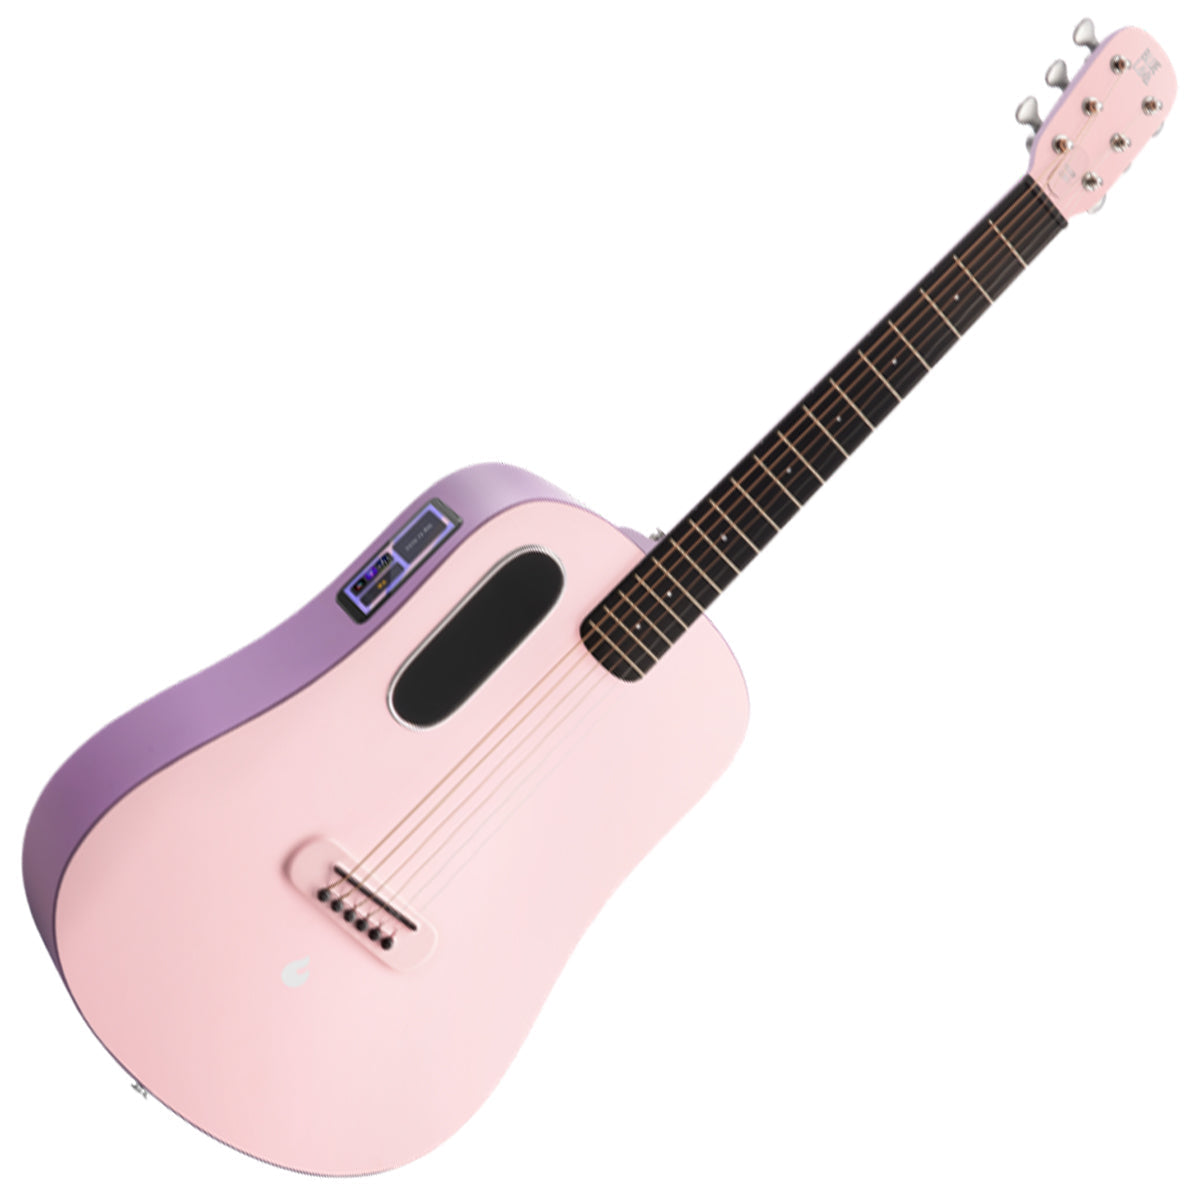 BLUE LAVA TOUCH with Airflow Bag ~ Coral Pink / Lavender-Richards Guitars Of Stratford Upon Avon